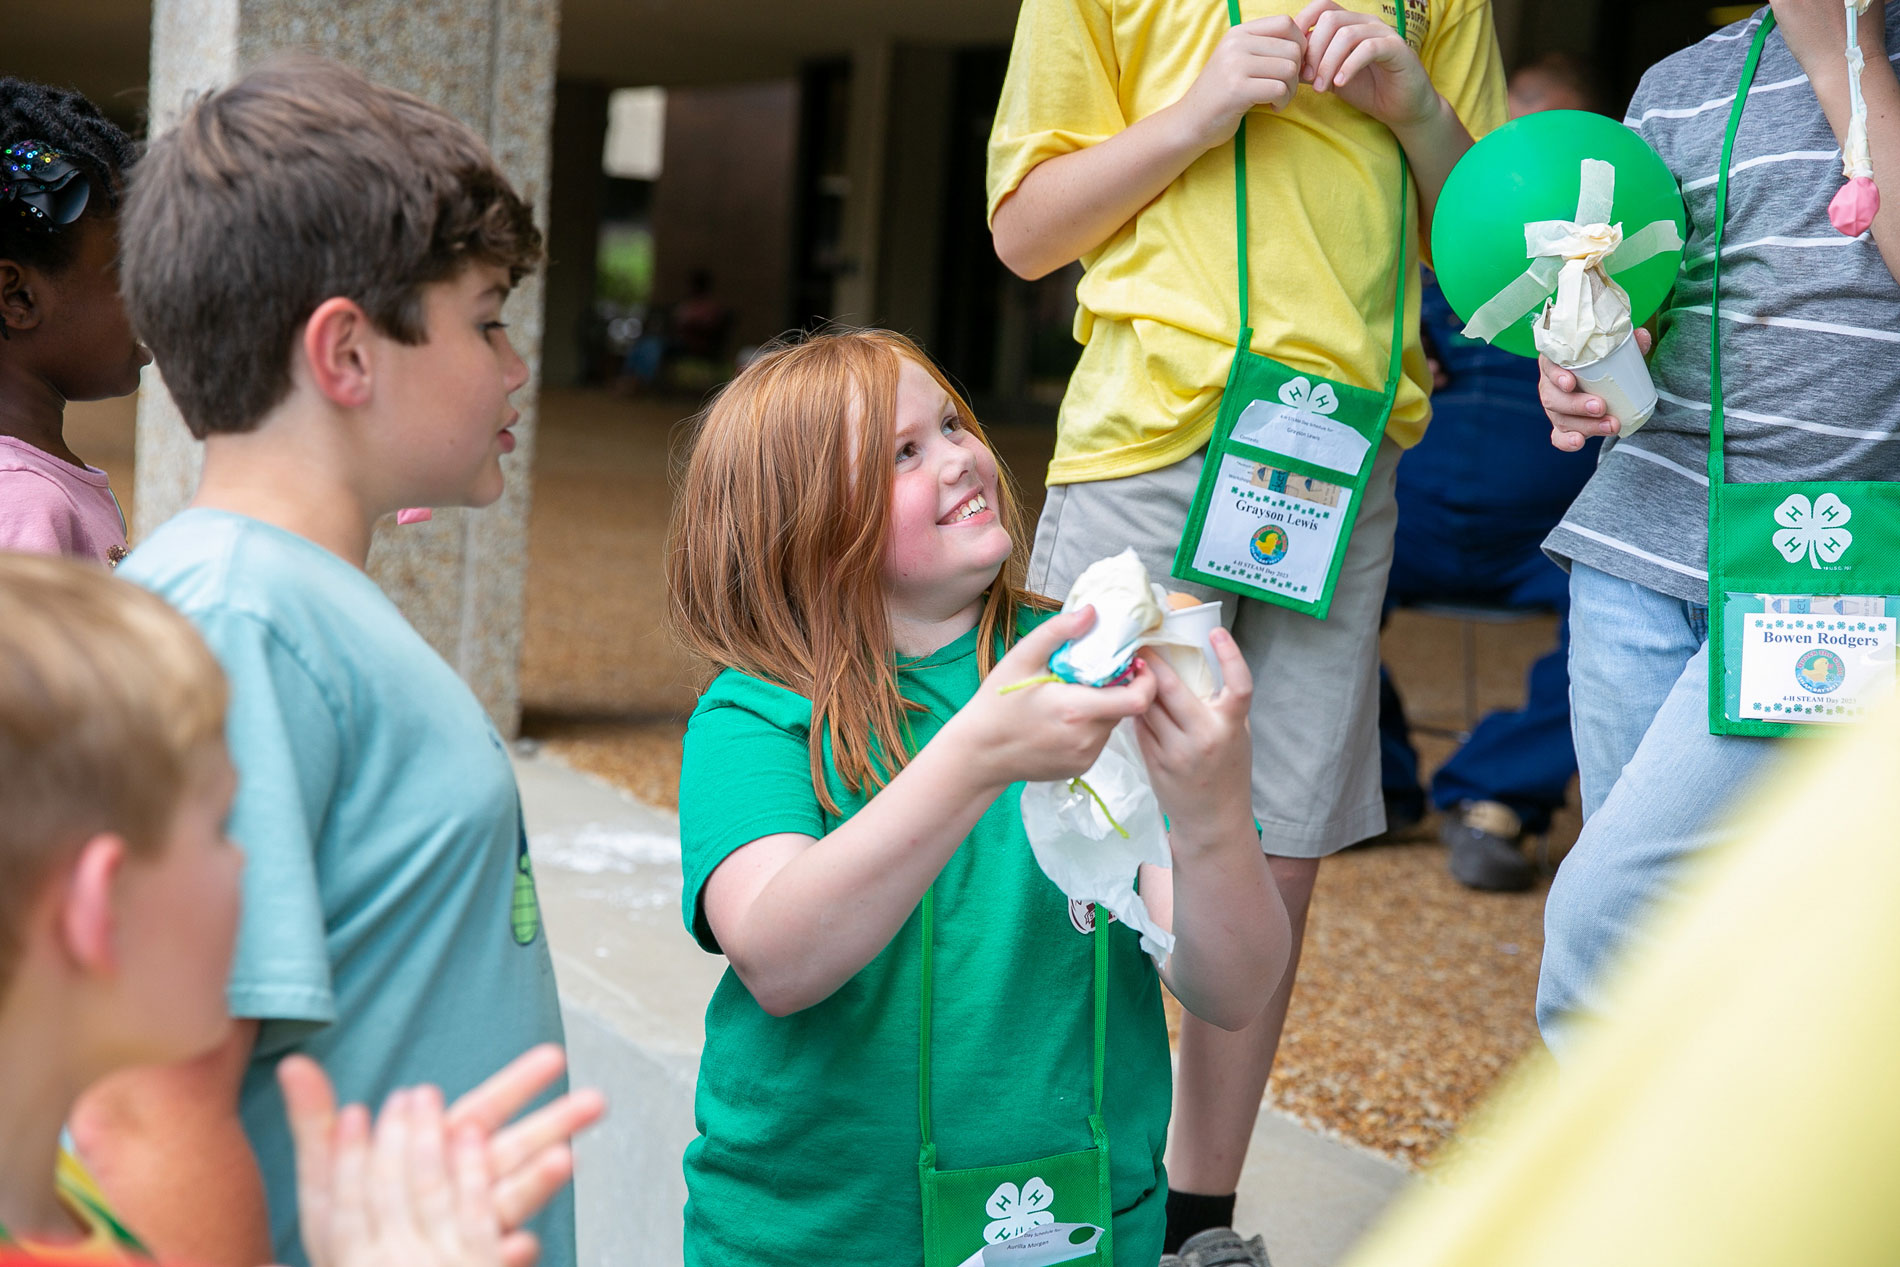 A girl smiling and holding a paper towel while a little boy looks on.